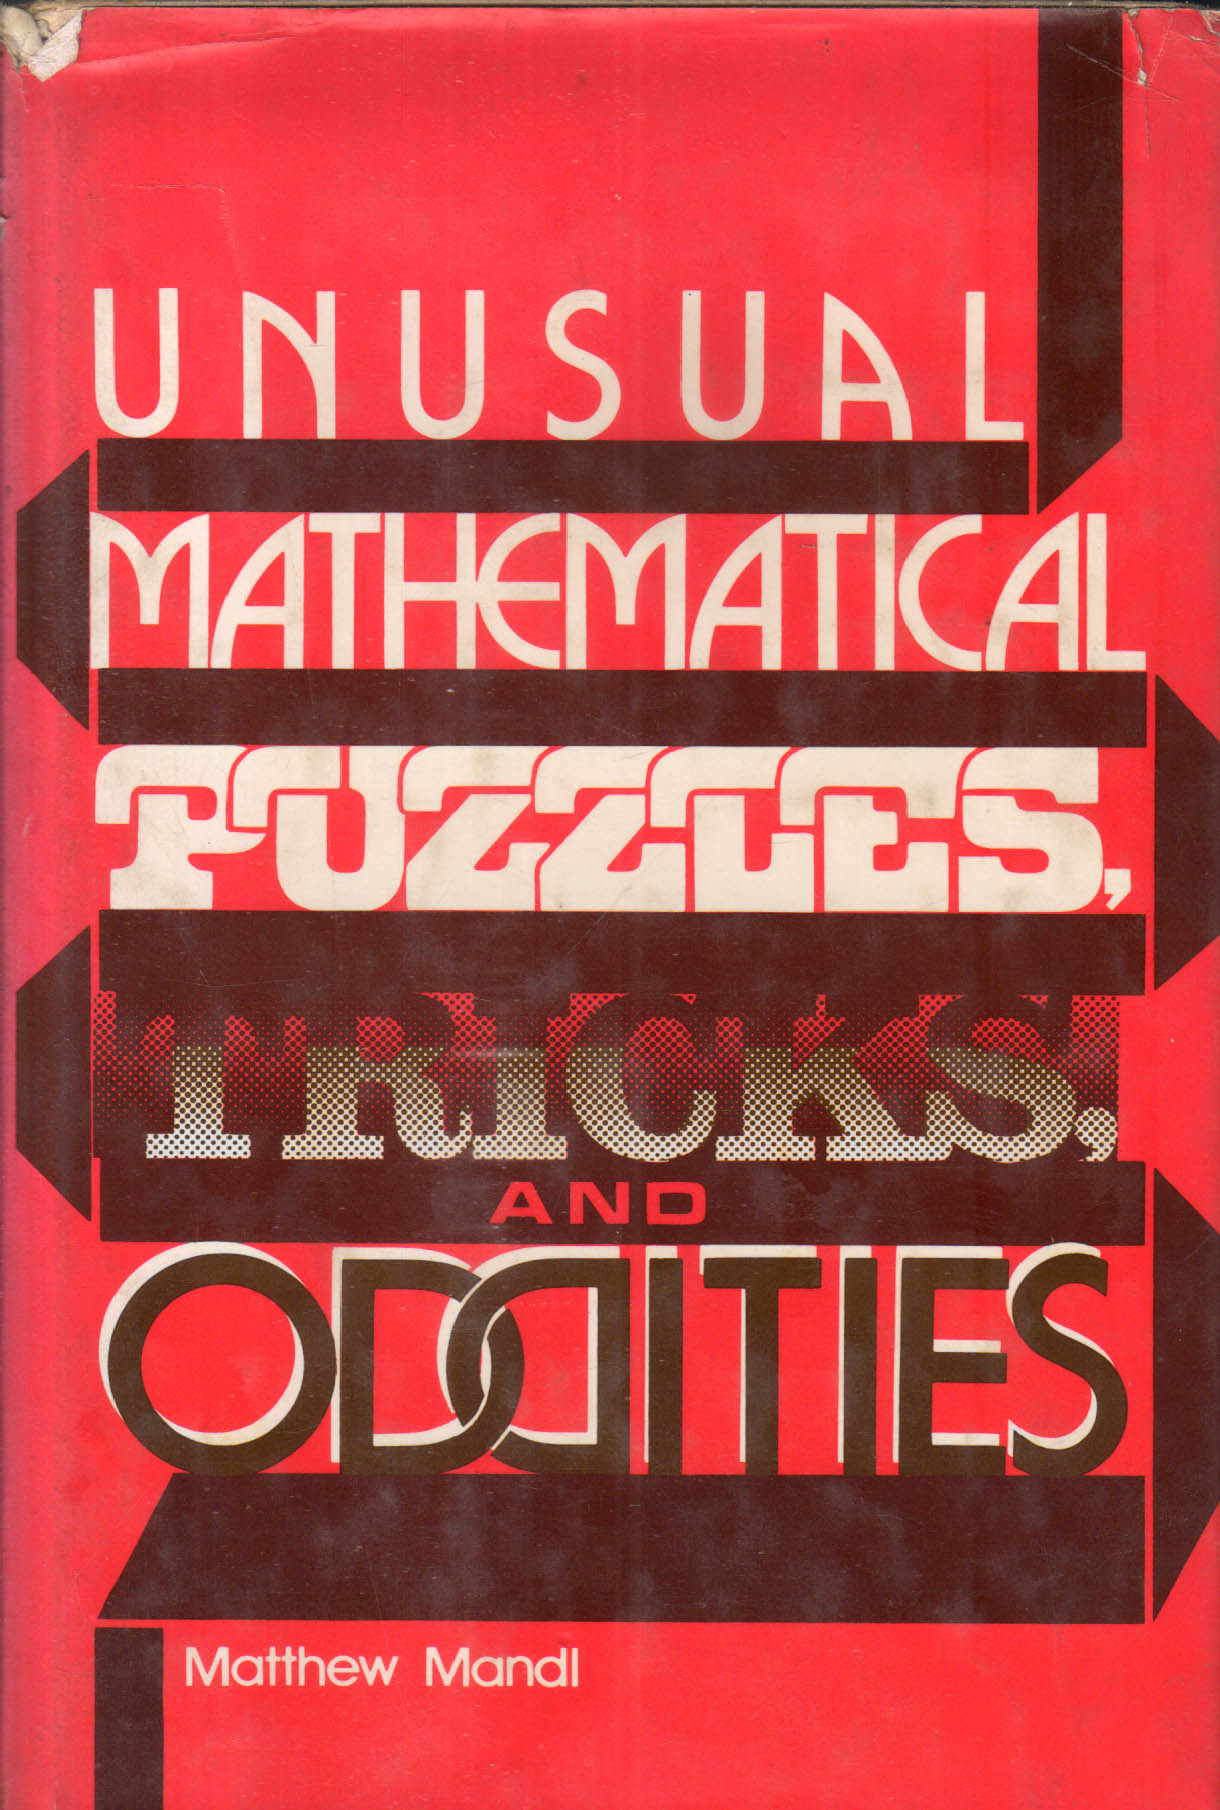 Unusual Mathematical Puzzles, Tricks, and Oddities